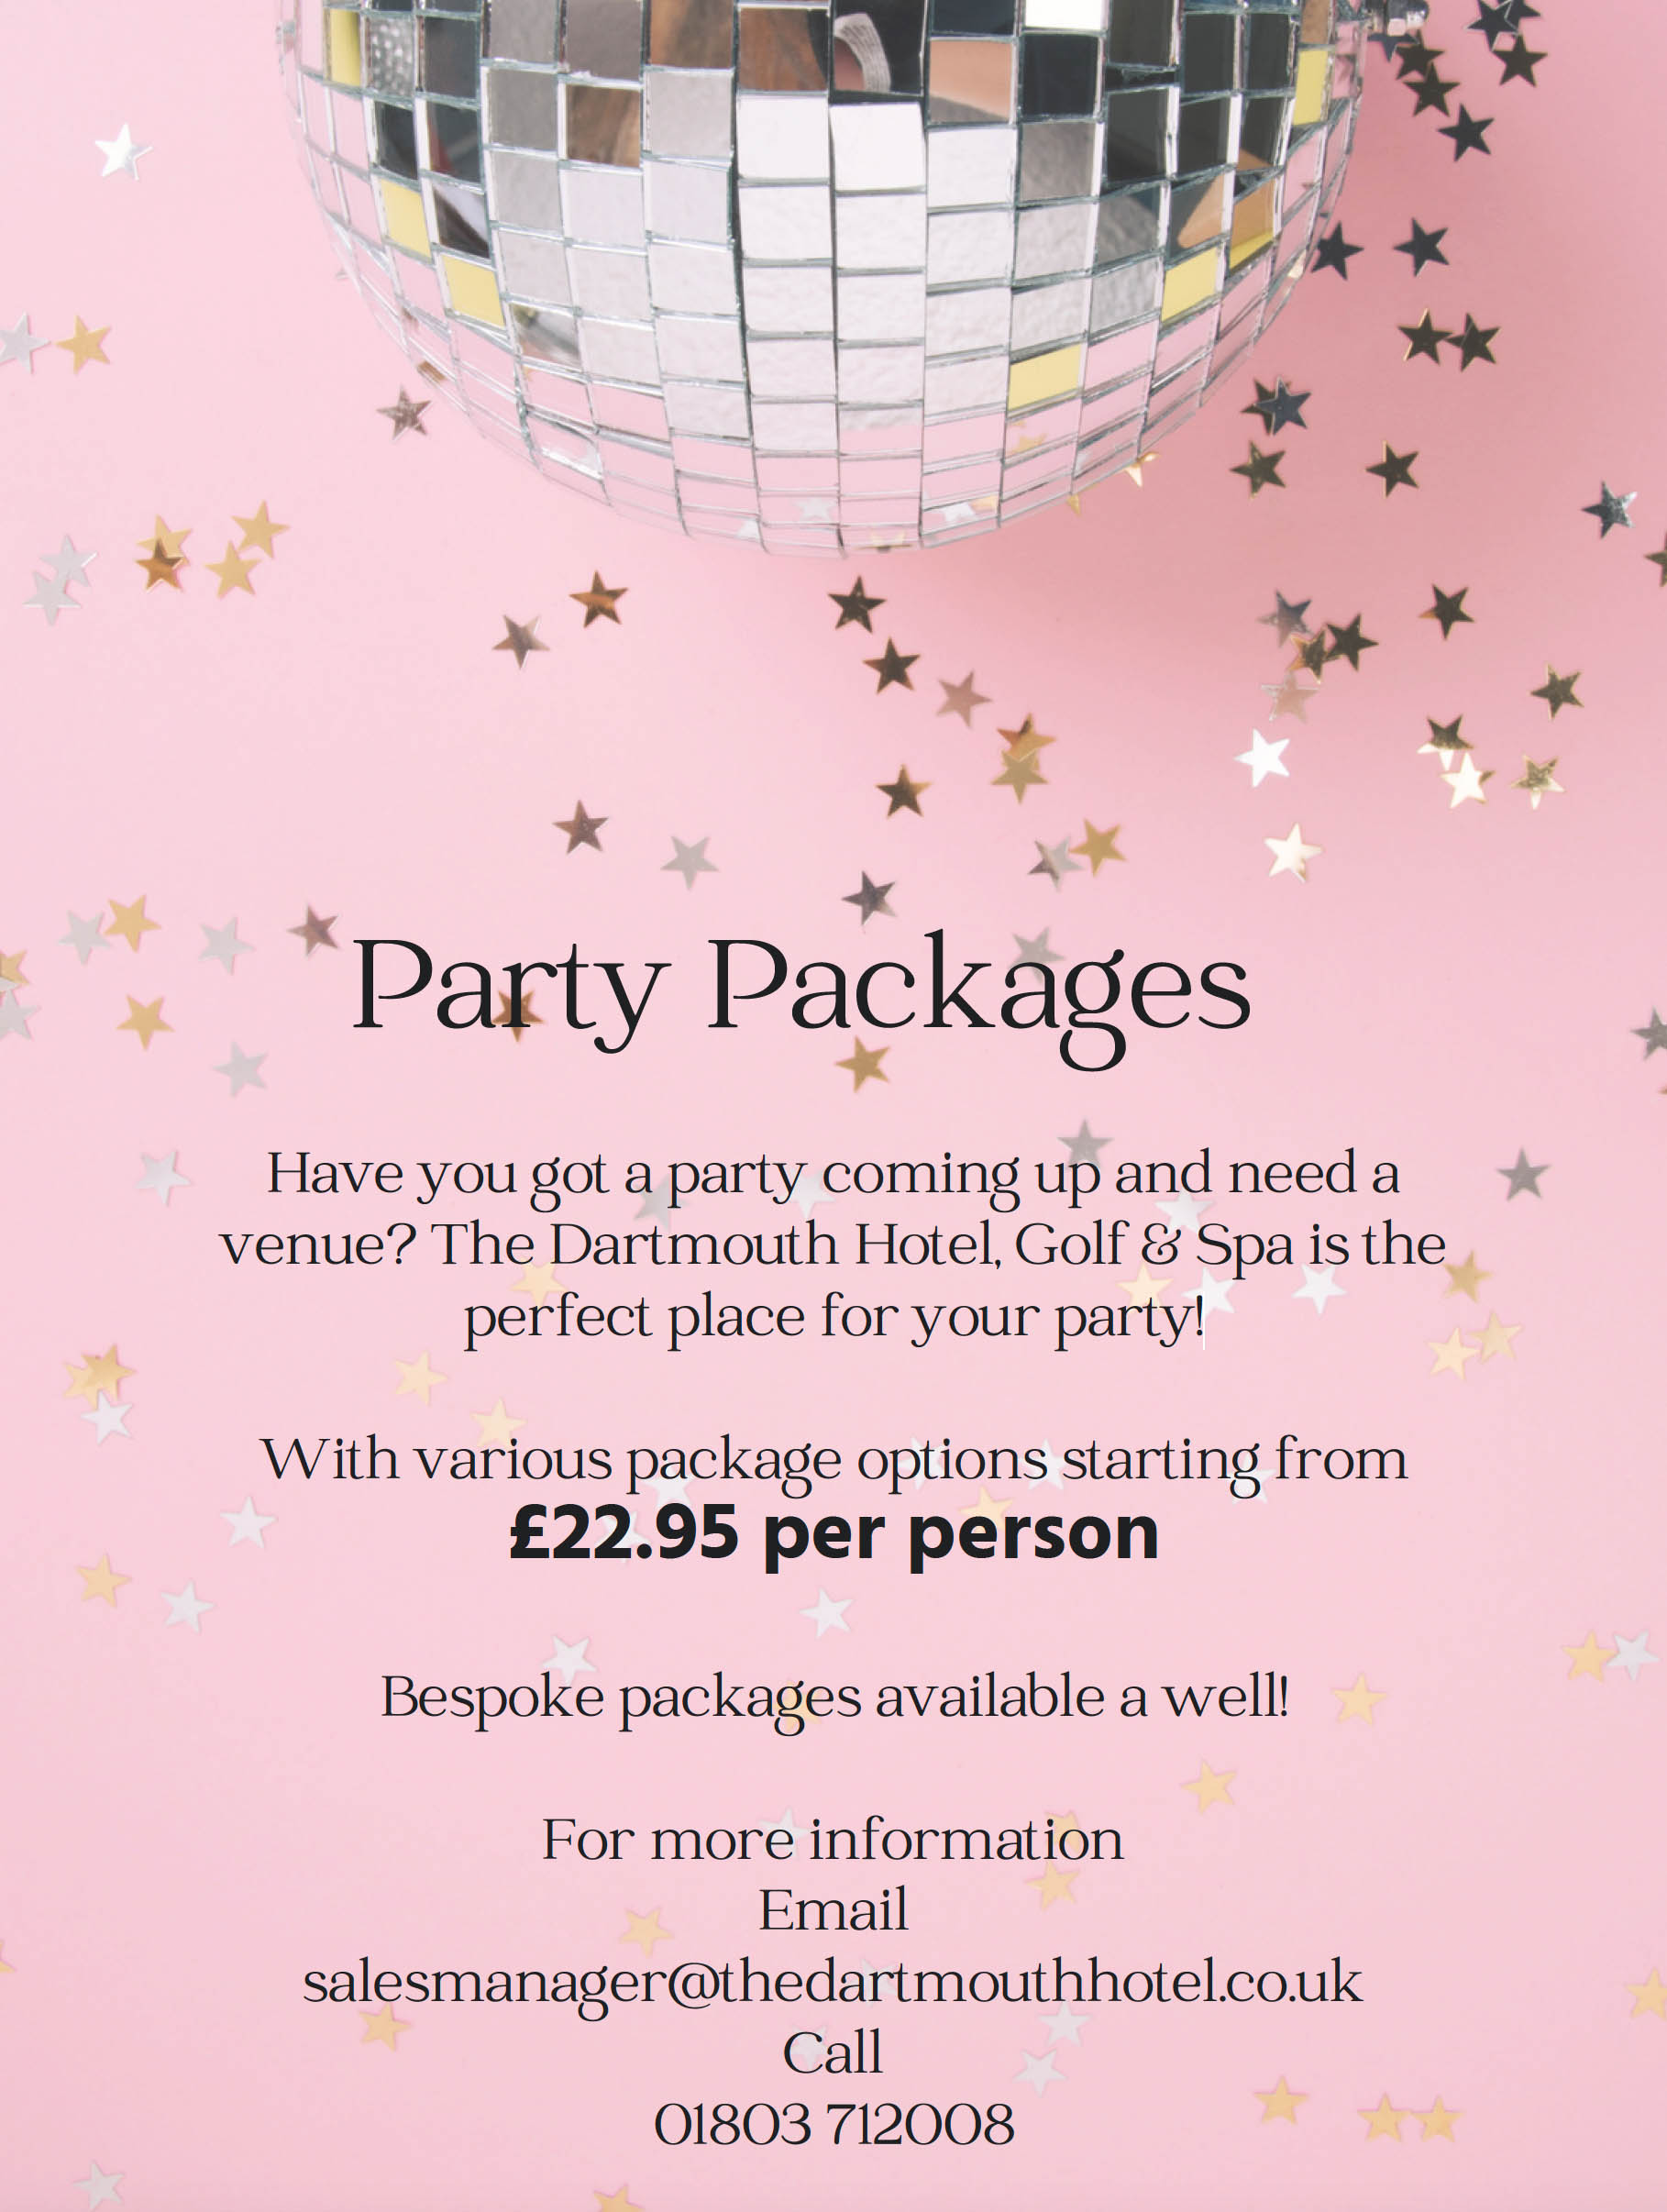 Party Packages at The Dartmouth Hotel Golf & Spa